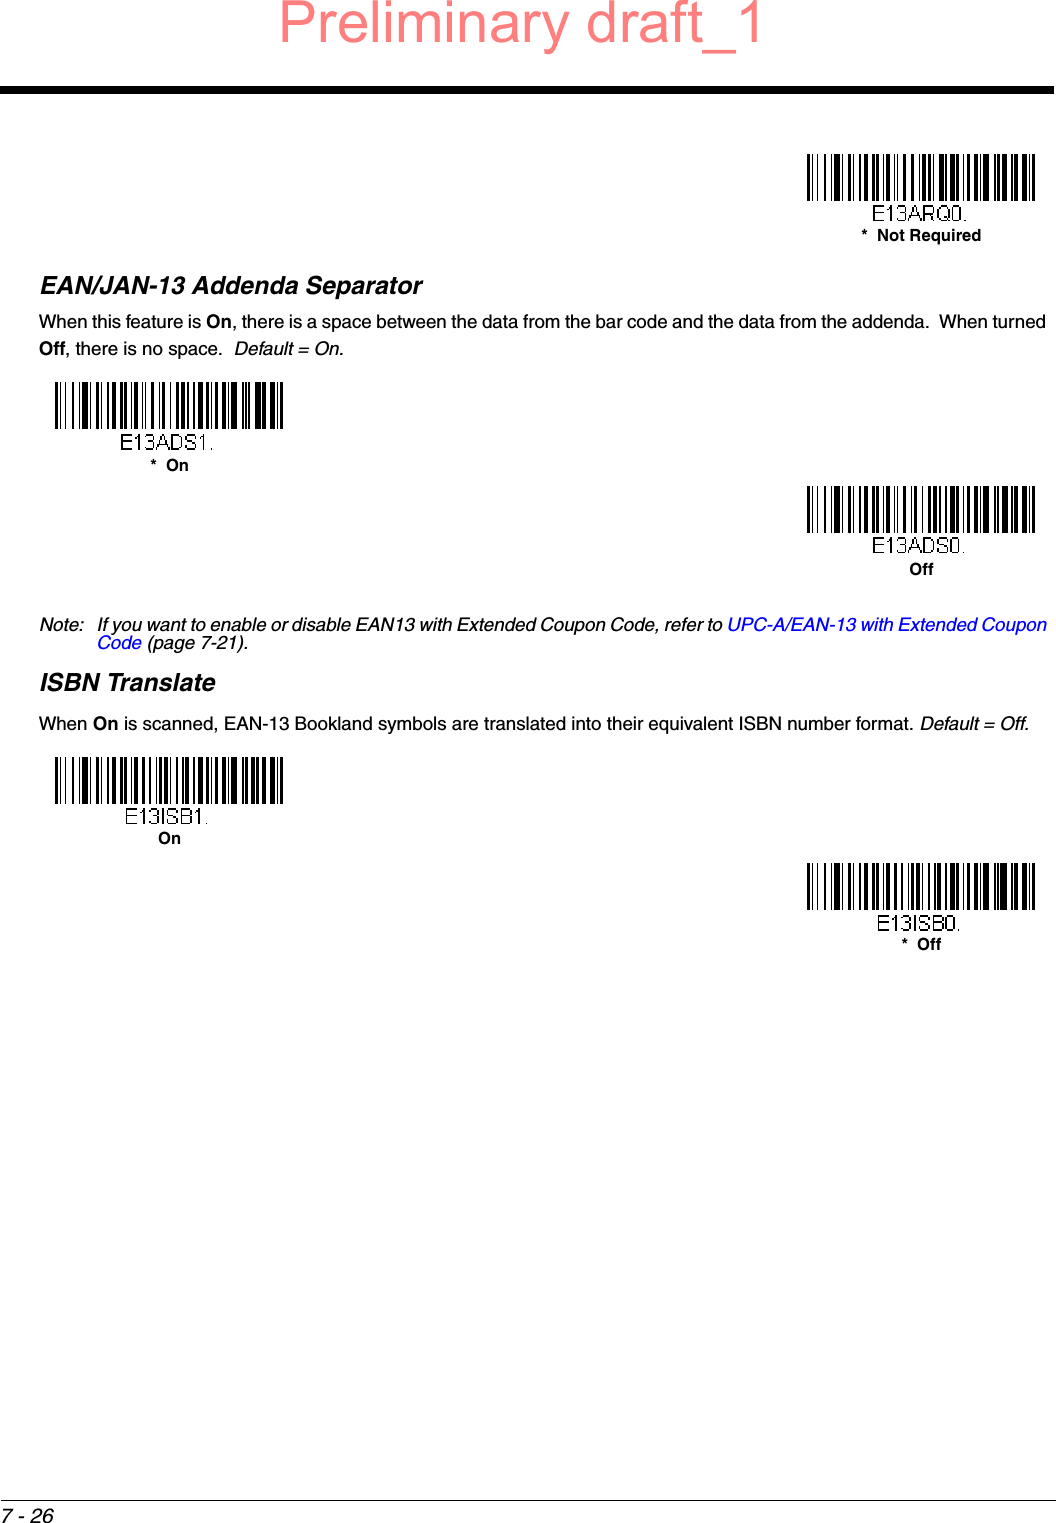 7 - 26EAN/JAN-13 Addenda SeparatorWhen this feature is On, there is a space between the data from the bar code and the data from the addenda.  When turned Off, there is no space.  Default = On.Note: If you want to enable or disable EAN13 with Extended Coupon Code, refer to UPC-A/EAN-13 with Extended Coupon Code (page 7-21).ISBN TranslateWhen On is scanned, EAN-13 Bookland symbols are translated into their equivalent ISBN number format. Default = Off. *  Not Required*  OnOffOn*  OffPreliminary draft_1